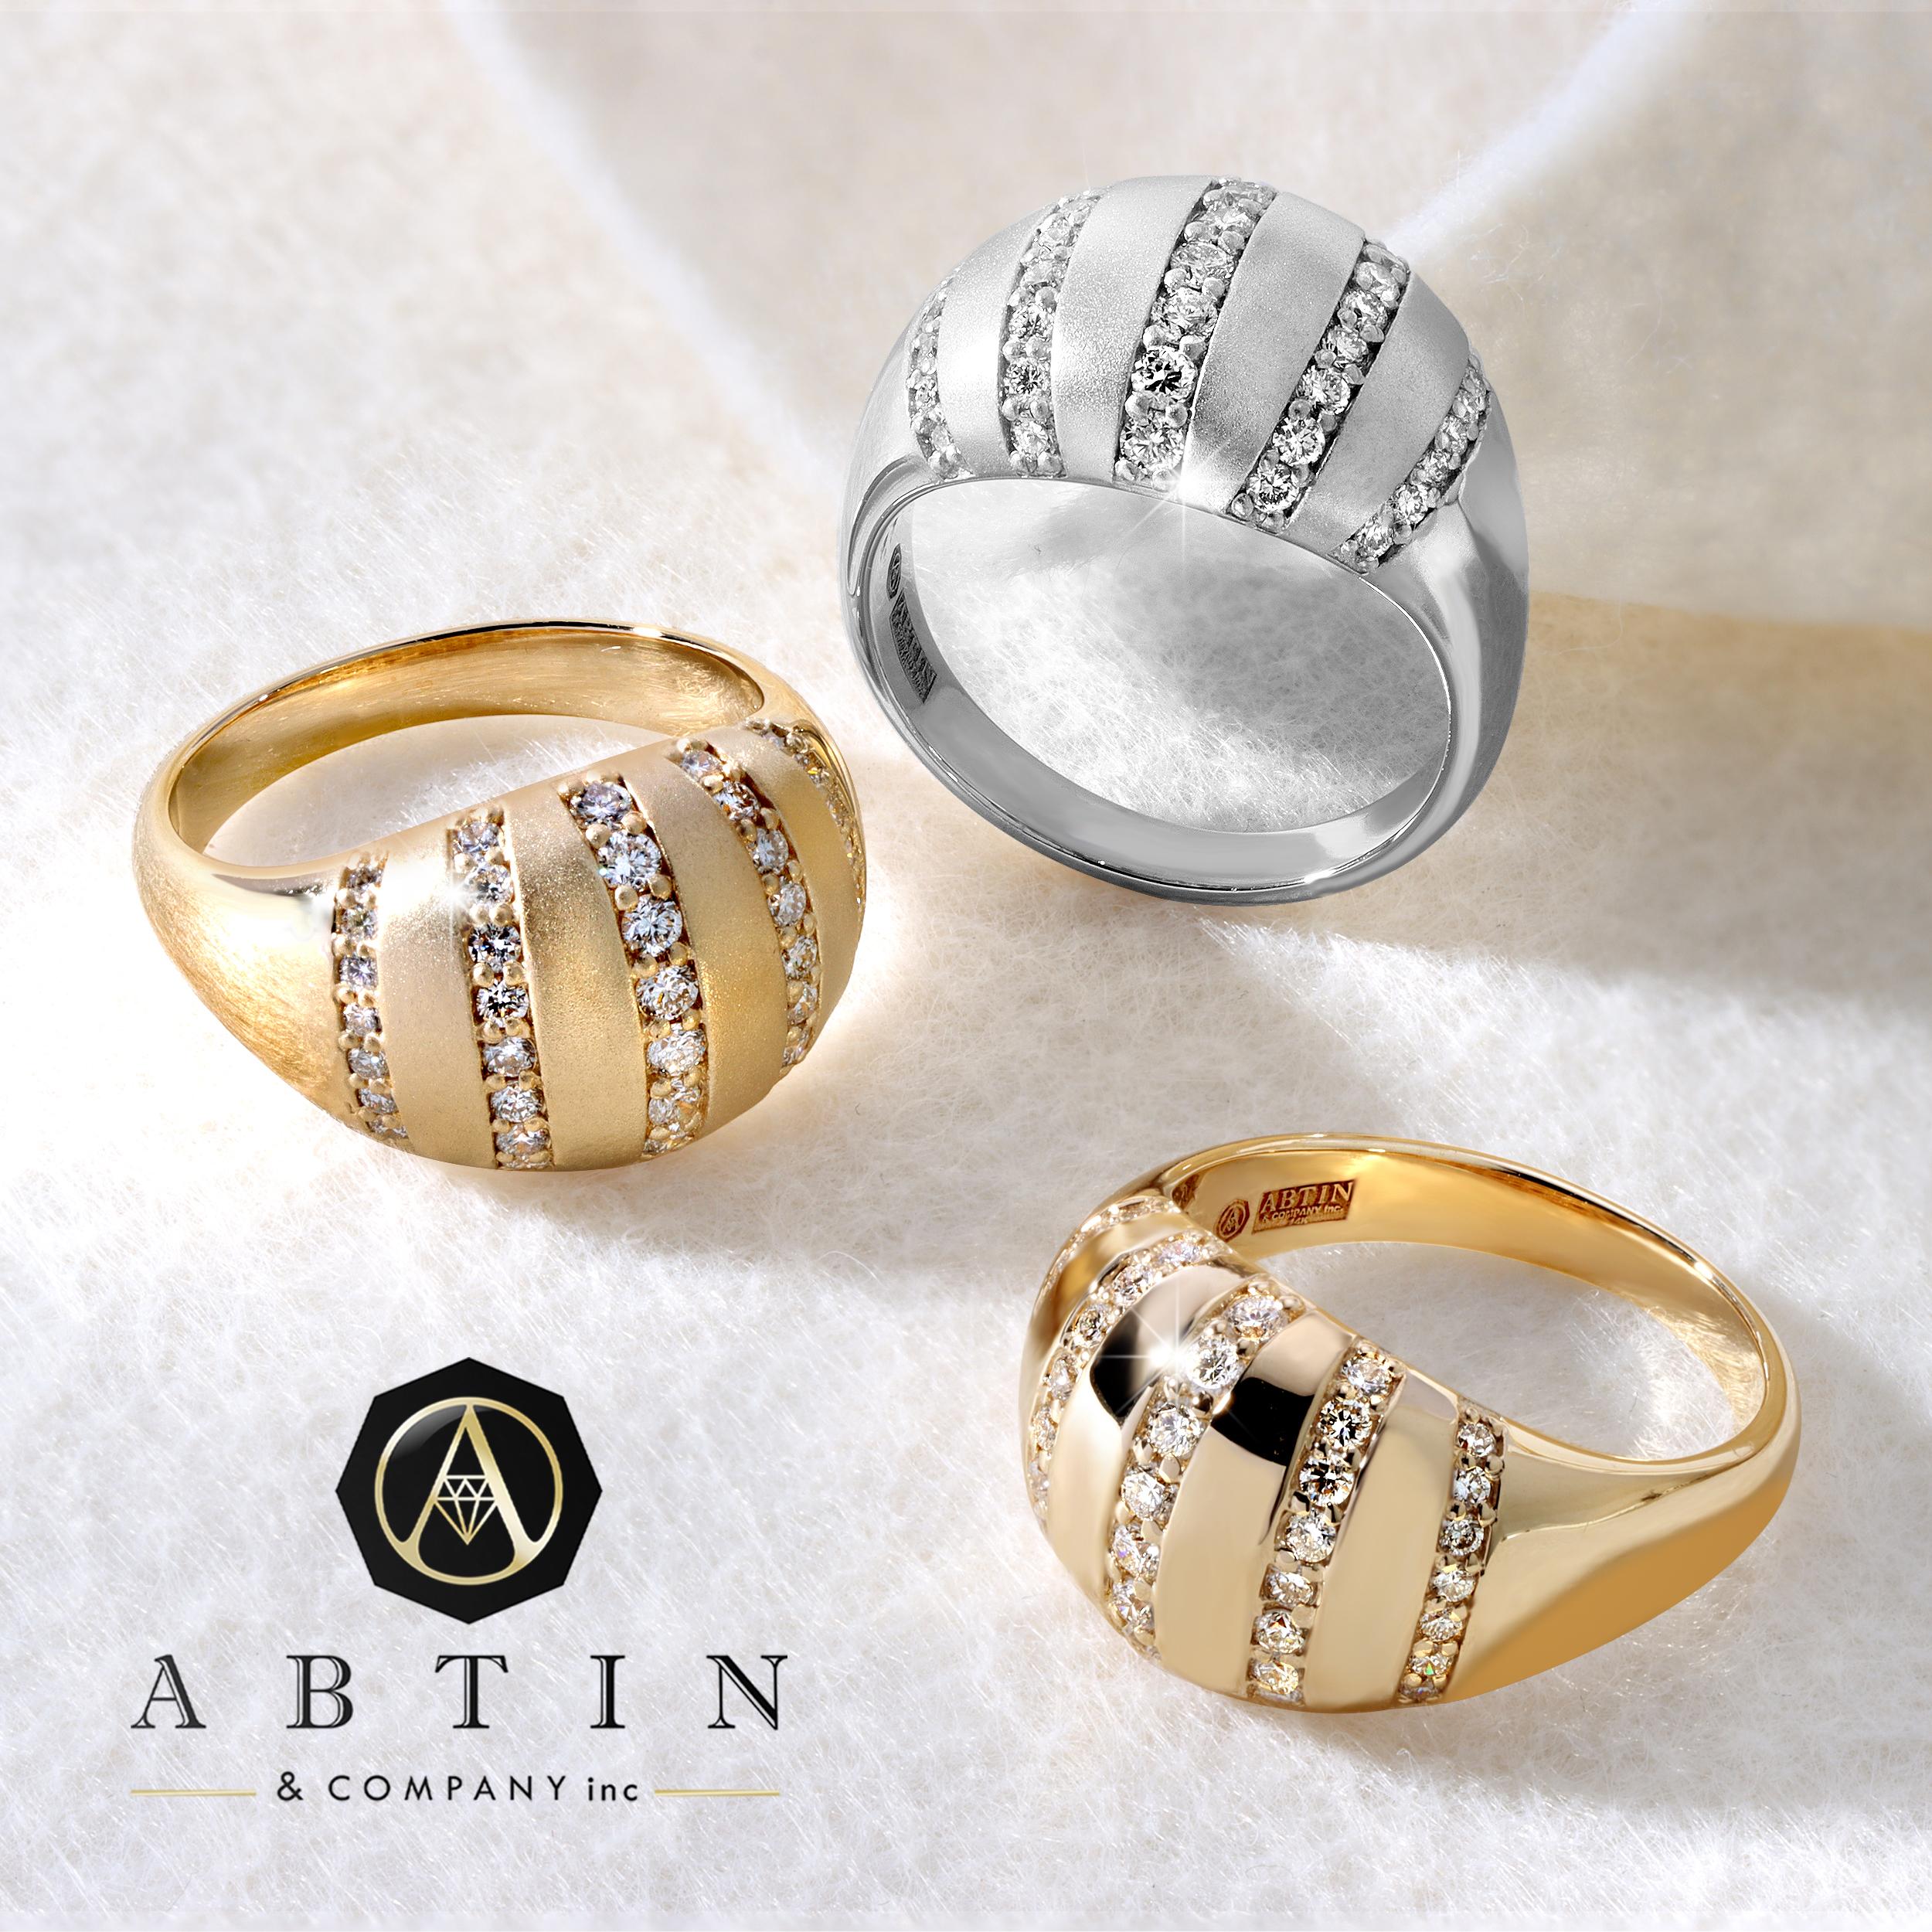 Crafted in 14K gold, this contemporary ring features stripe diamond studs softly rounding the golden surface in perfectly set rows of pave diamonds. The details on this ring is intricate and effortless. A must have for fashion forward modern women.